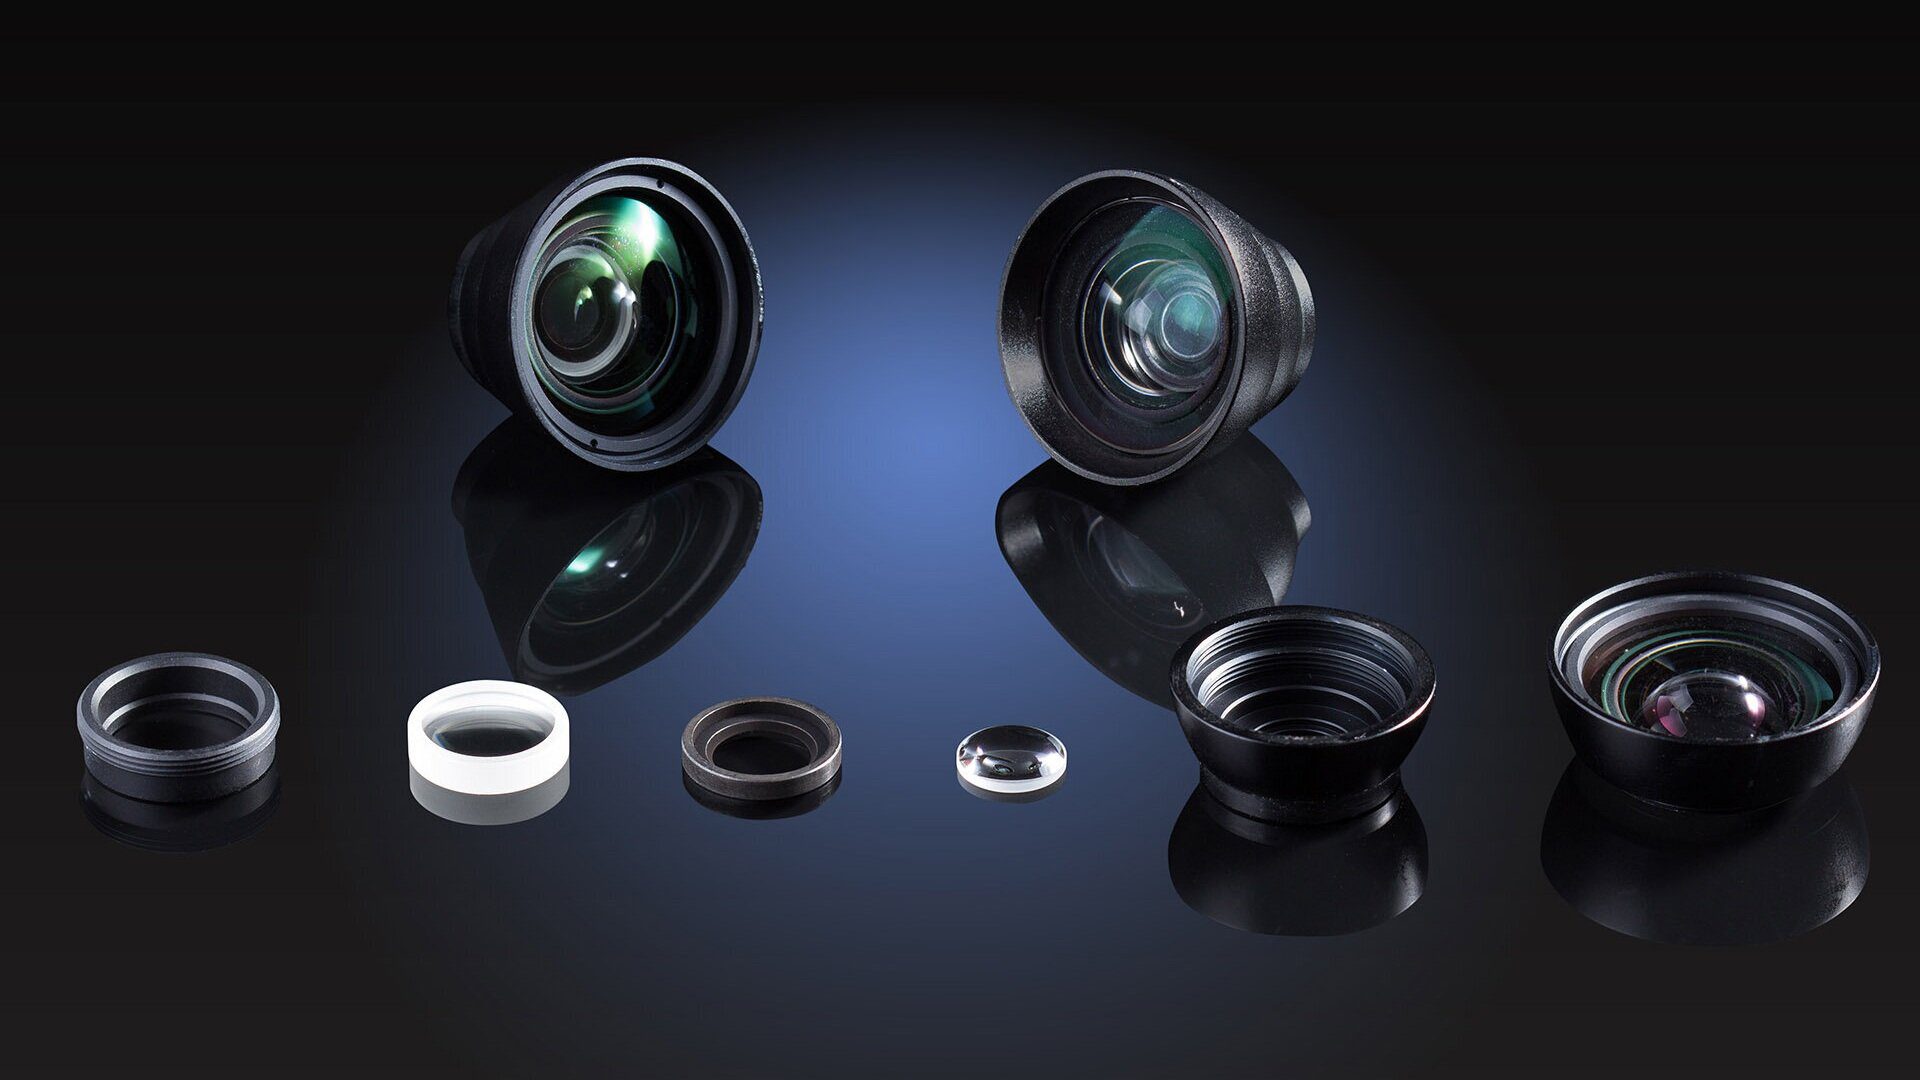 Custom Lens Design and Optical Engineering Consulting